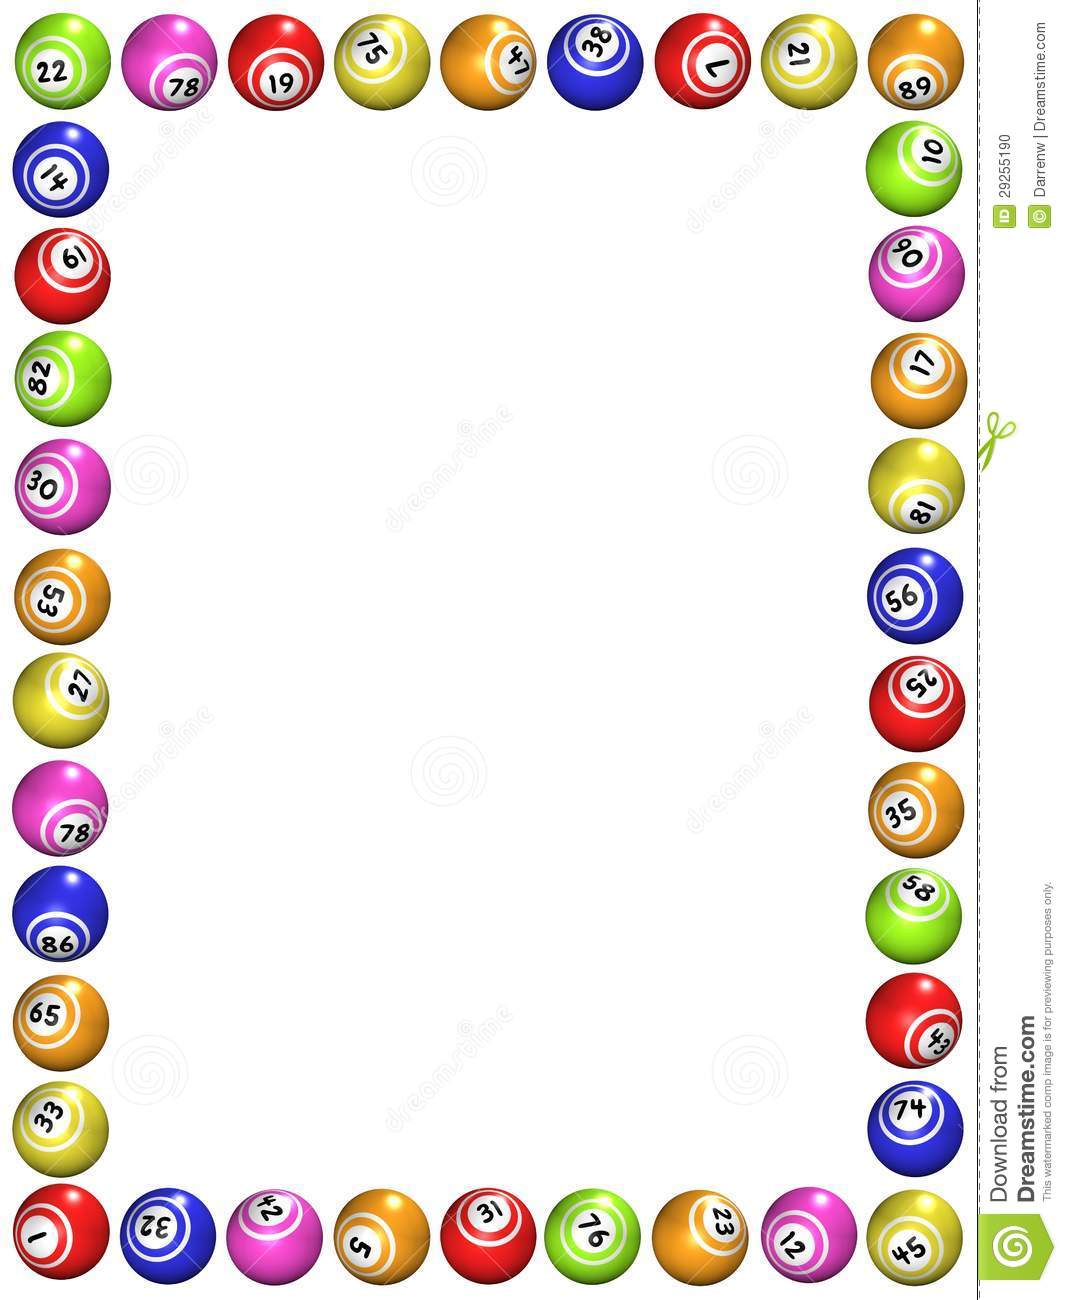 Displaying 20  Images For   Numbers Border Clipart